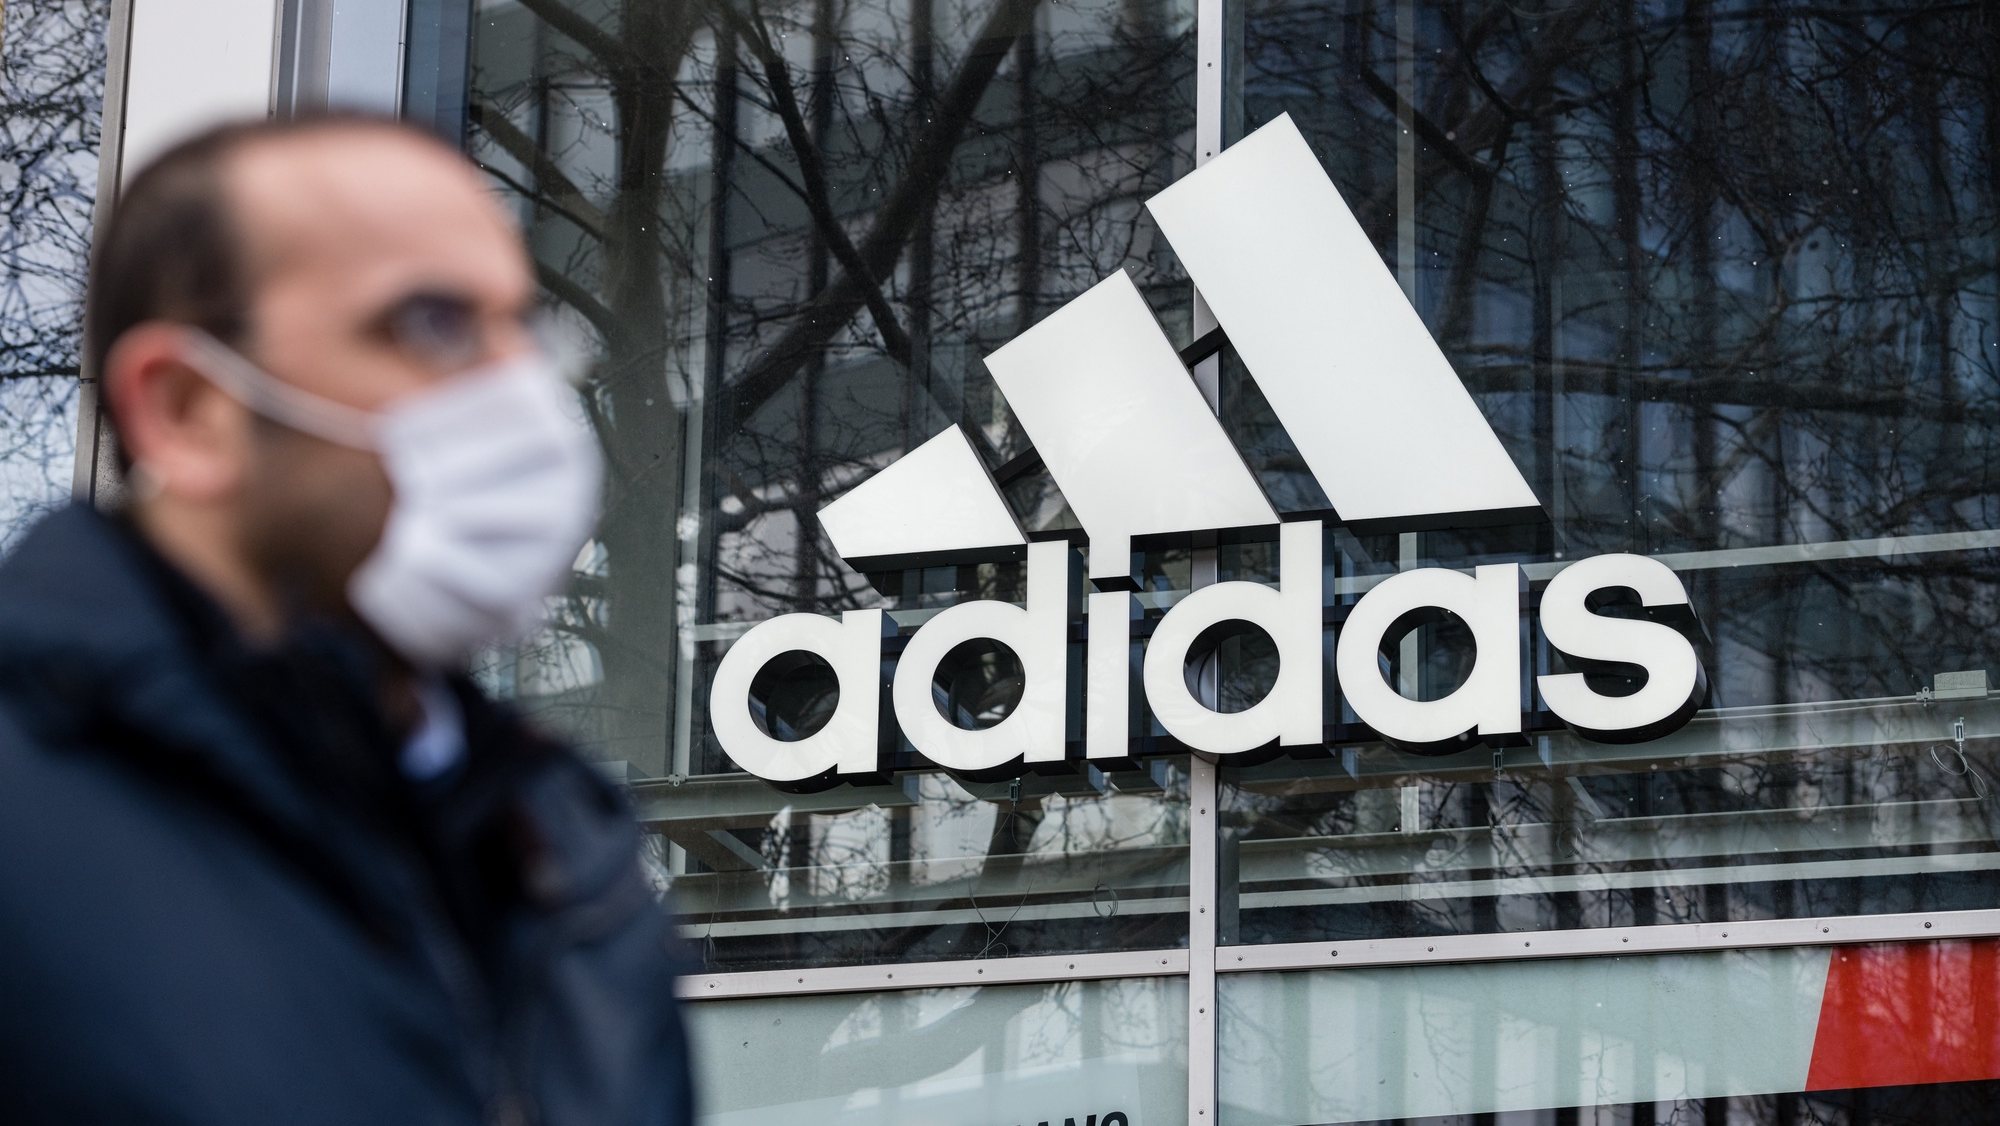 epa08334148 A man with protective mask in front of adidas store with the logo of the sporting goods manufacturer, in Berlin, Germany, 31 March 2020. The German government and local authorities are heightening measures to stem the spread of the coronavirus SARS-CoV-2 which causes the Covid-19 disease.  EPA/JENS SCHLUETER